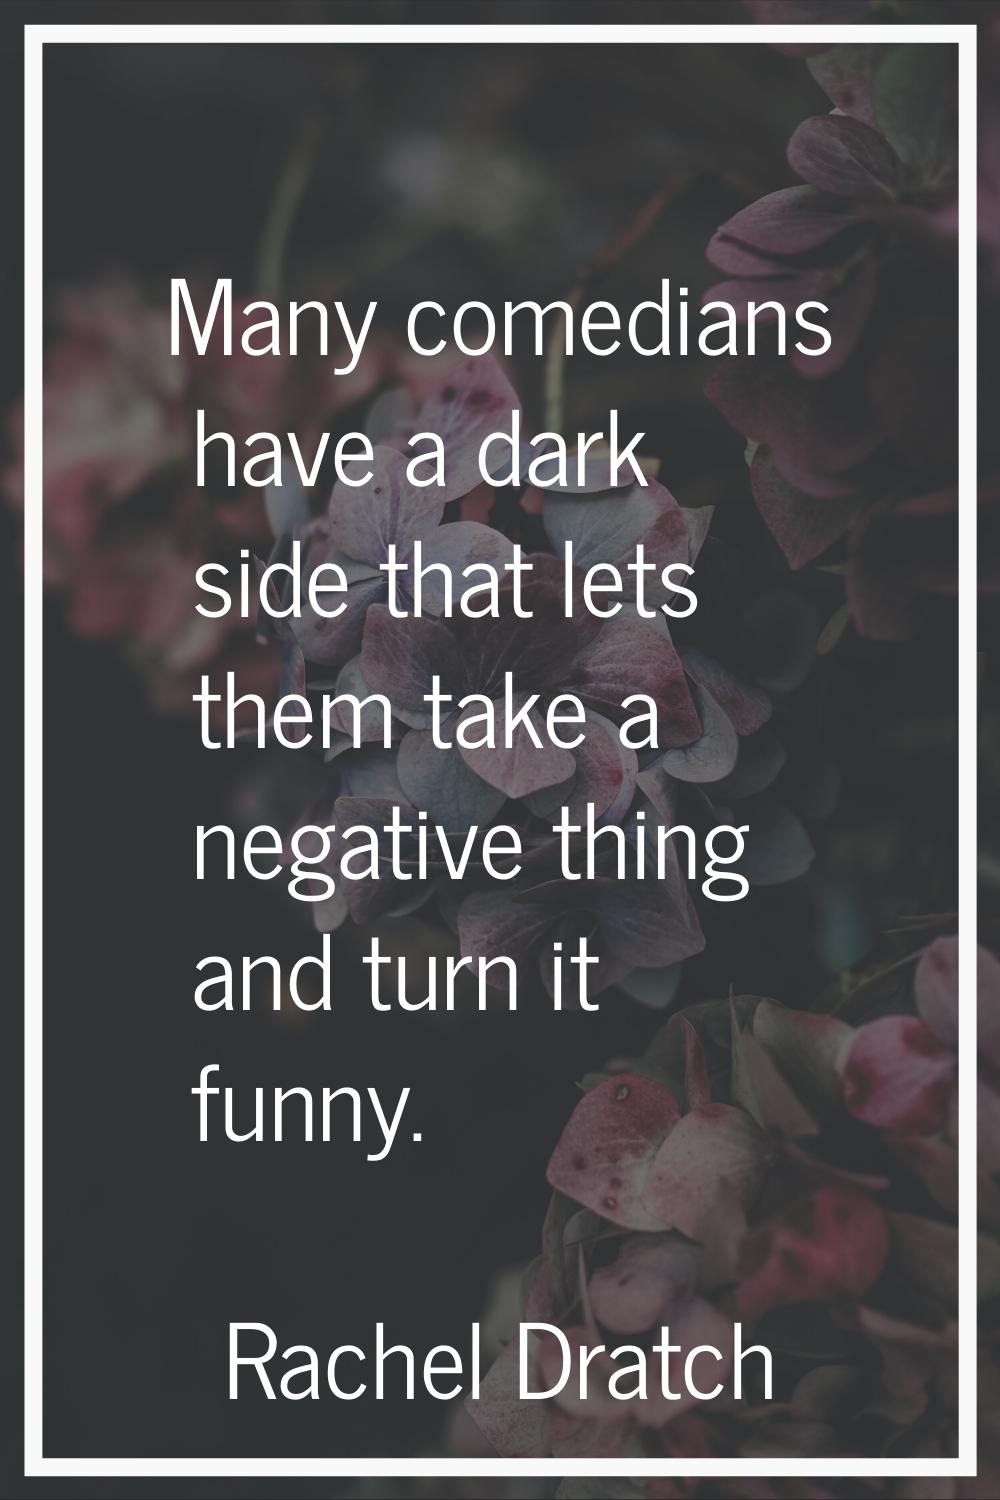 Many comedians have a dark side that lets them take a negative thing and turn it funny.